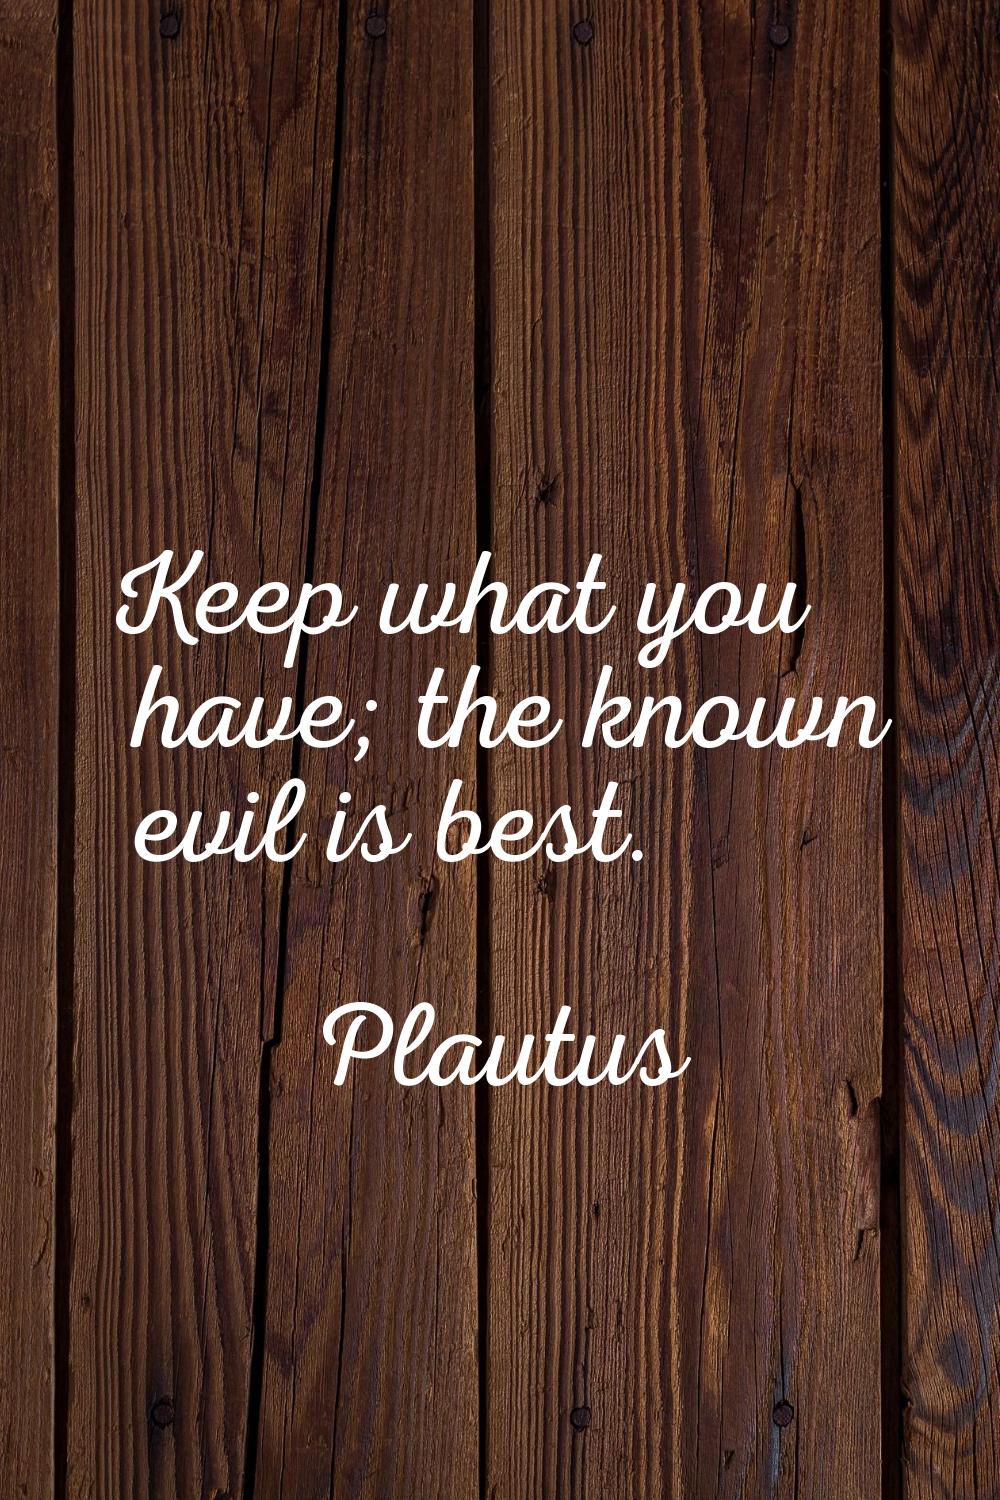 Keep what you have; the known evil is best.